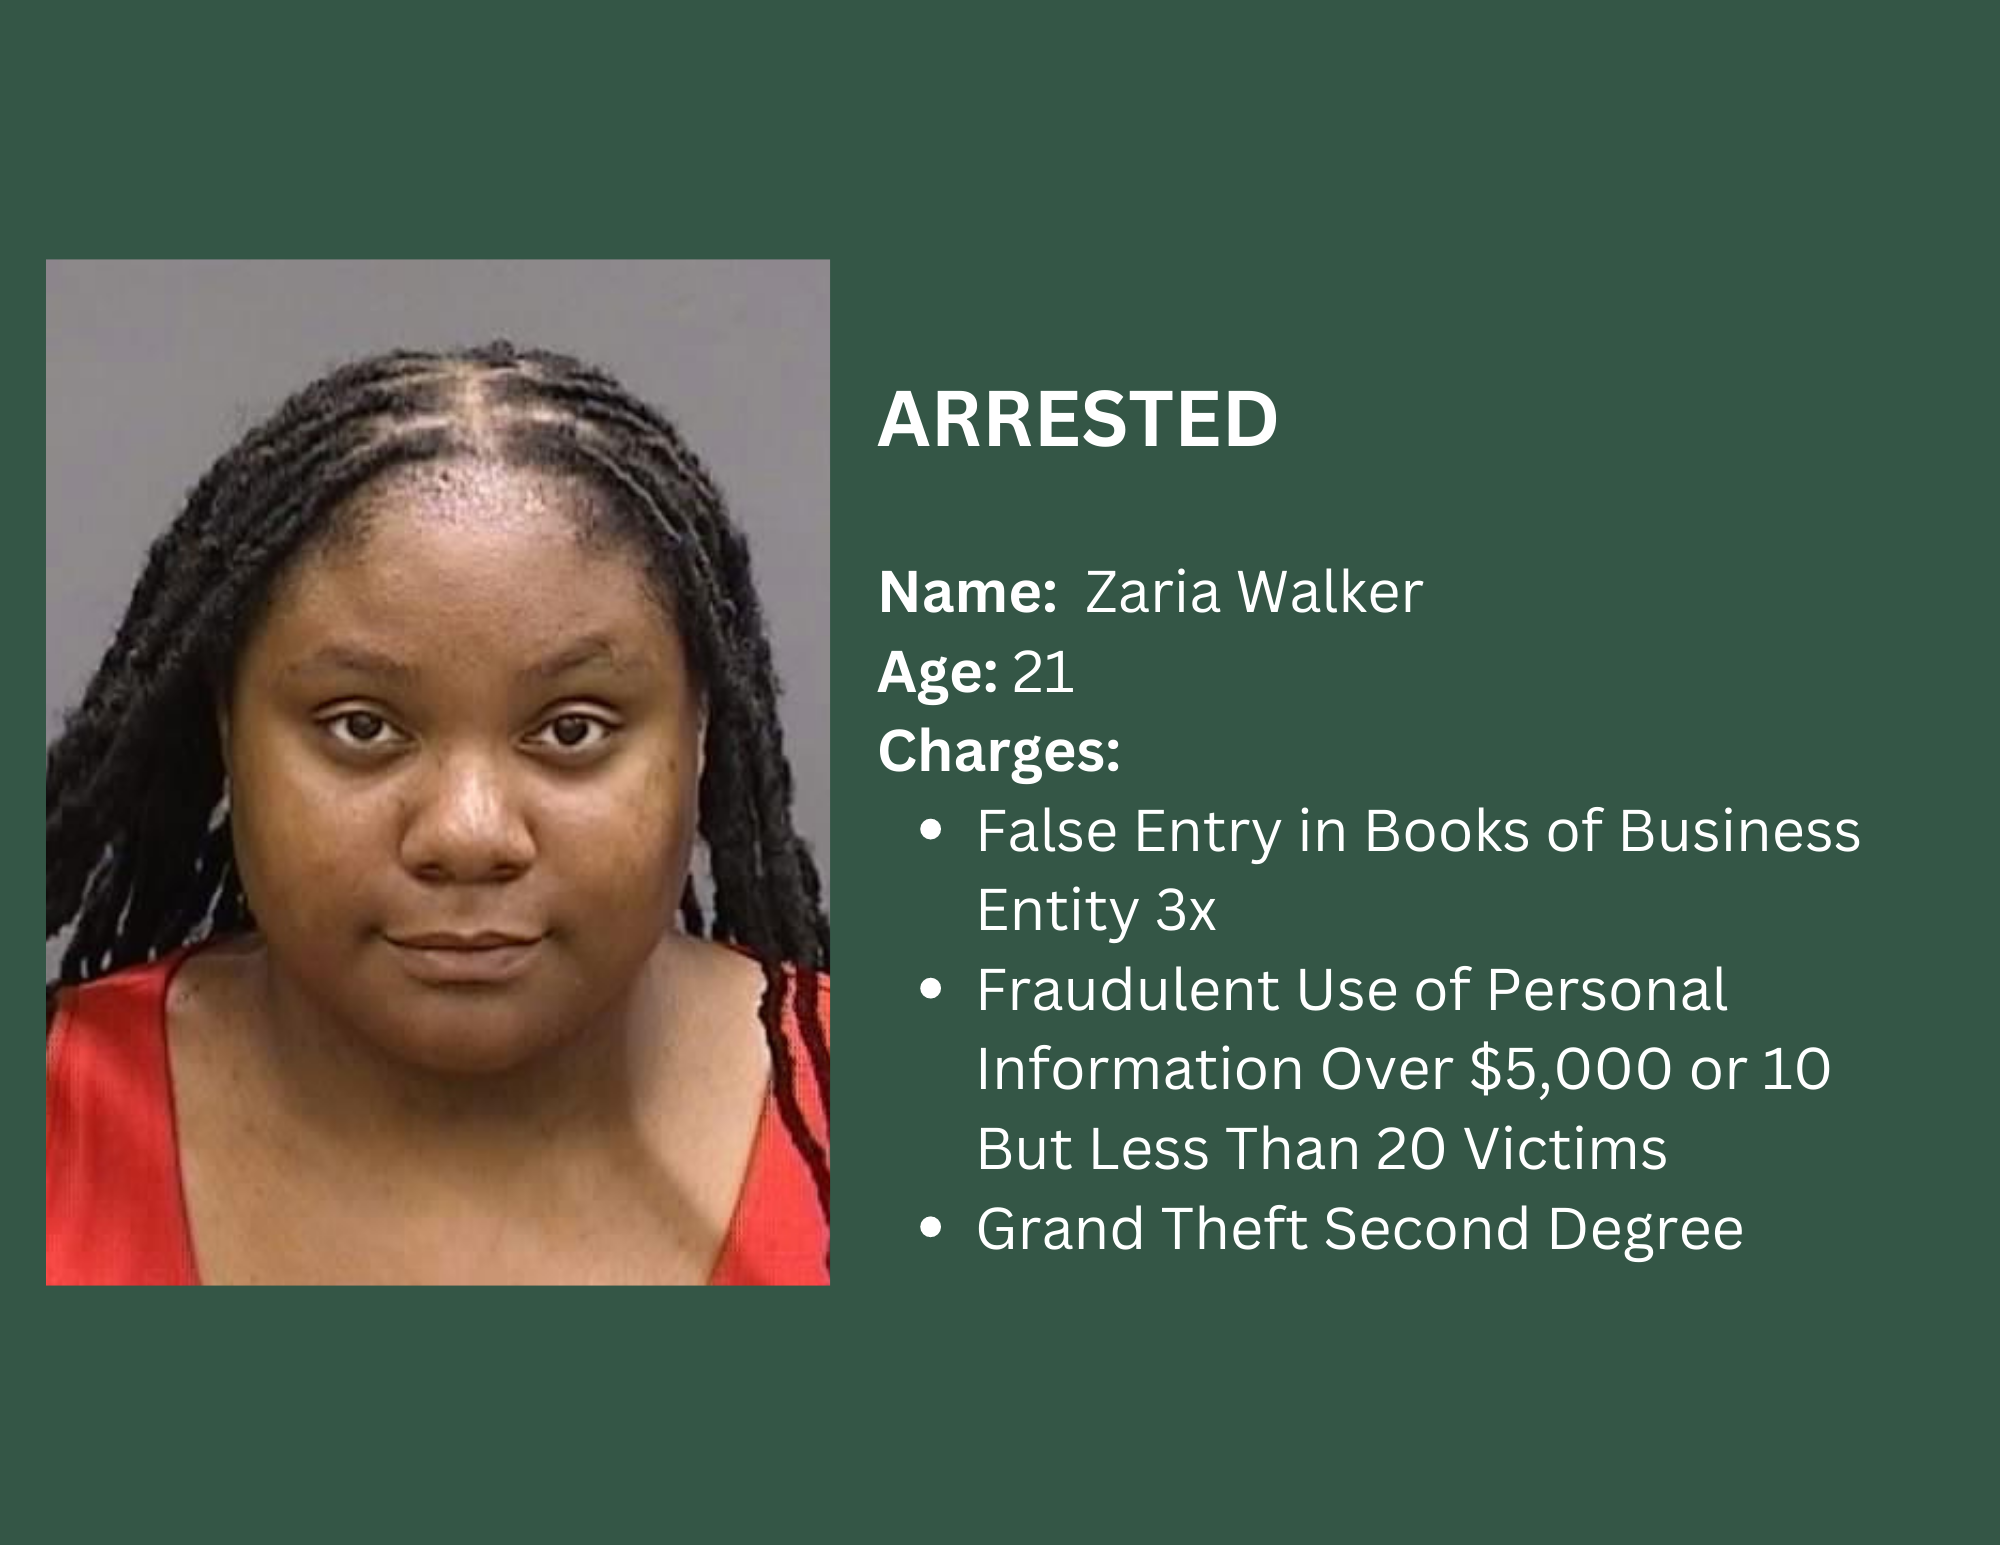 Woman Arrested for Laundering Money from Non-Profit